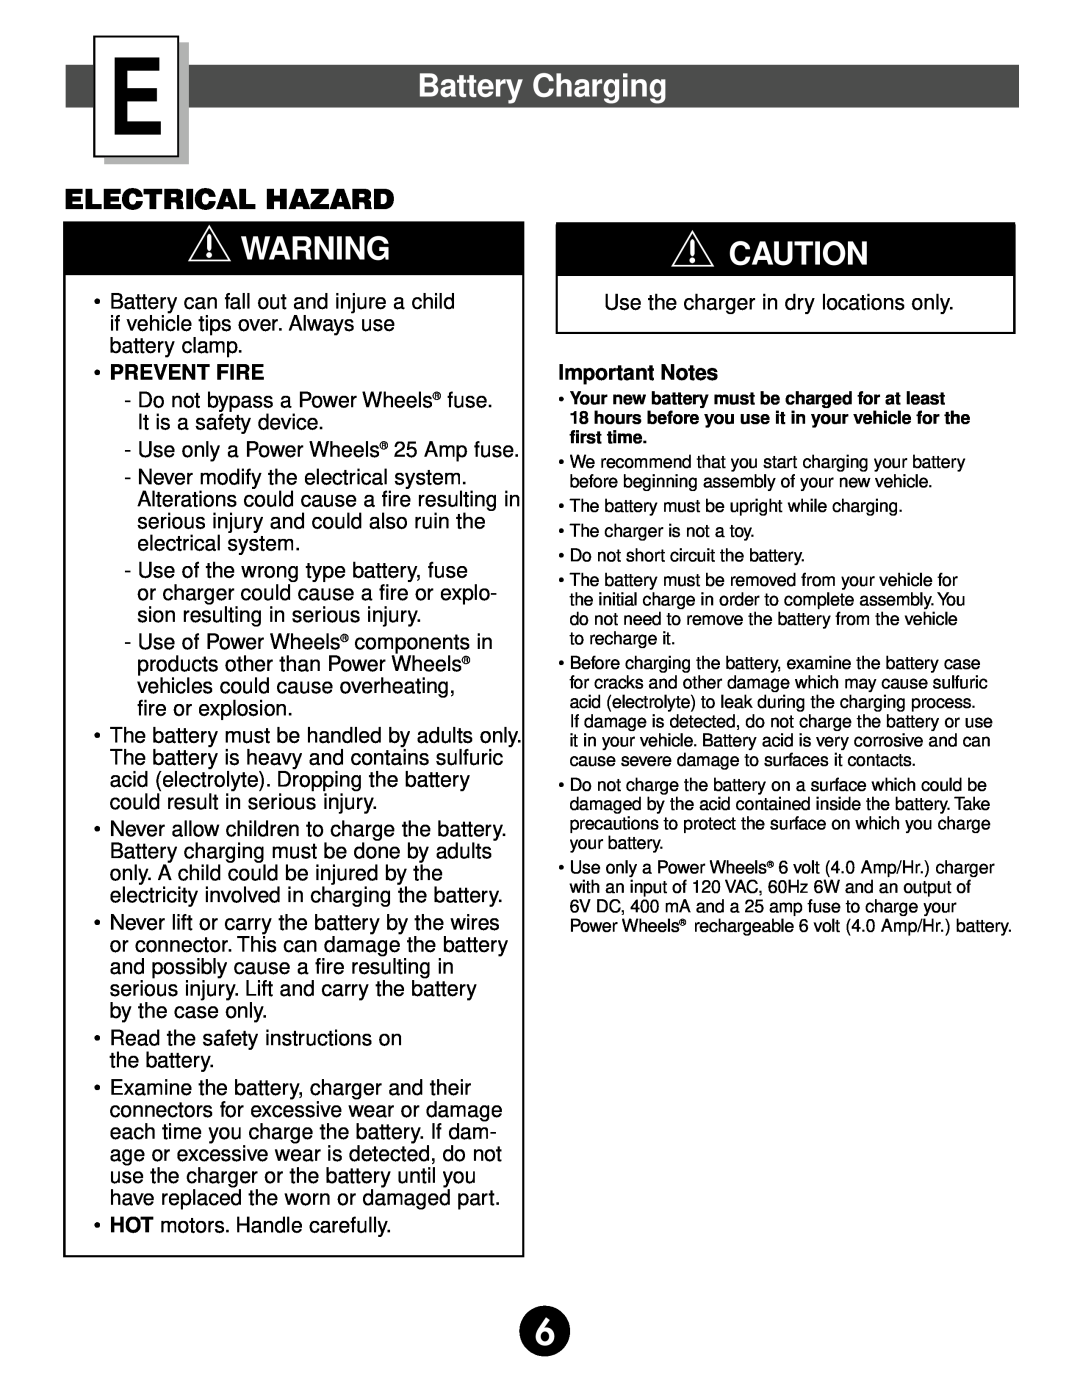 Fisher-Price 75320 owner manual Battery Charging, Important Notes, Electrical Hazard, Prevent Fire 